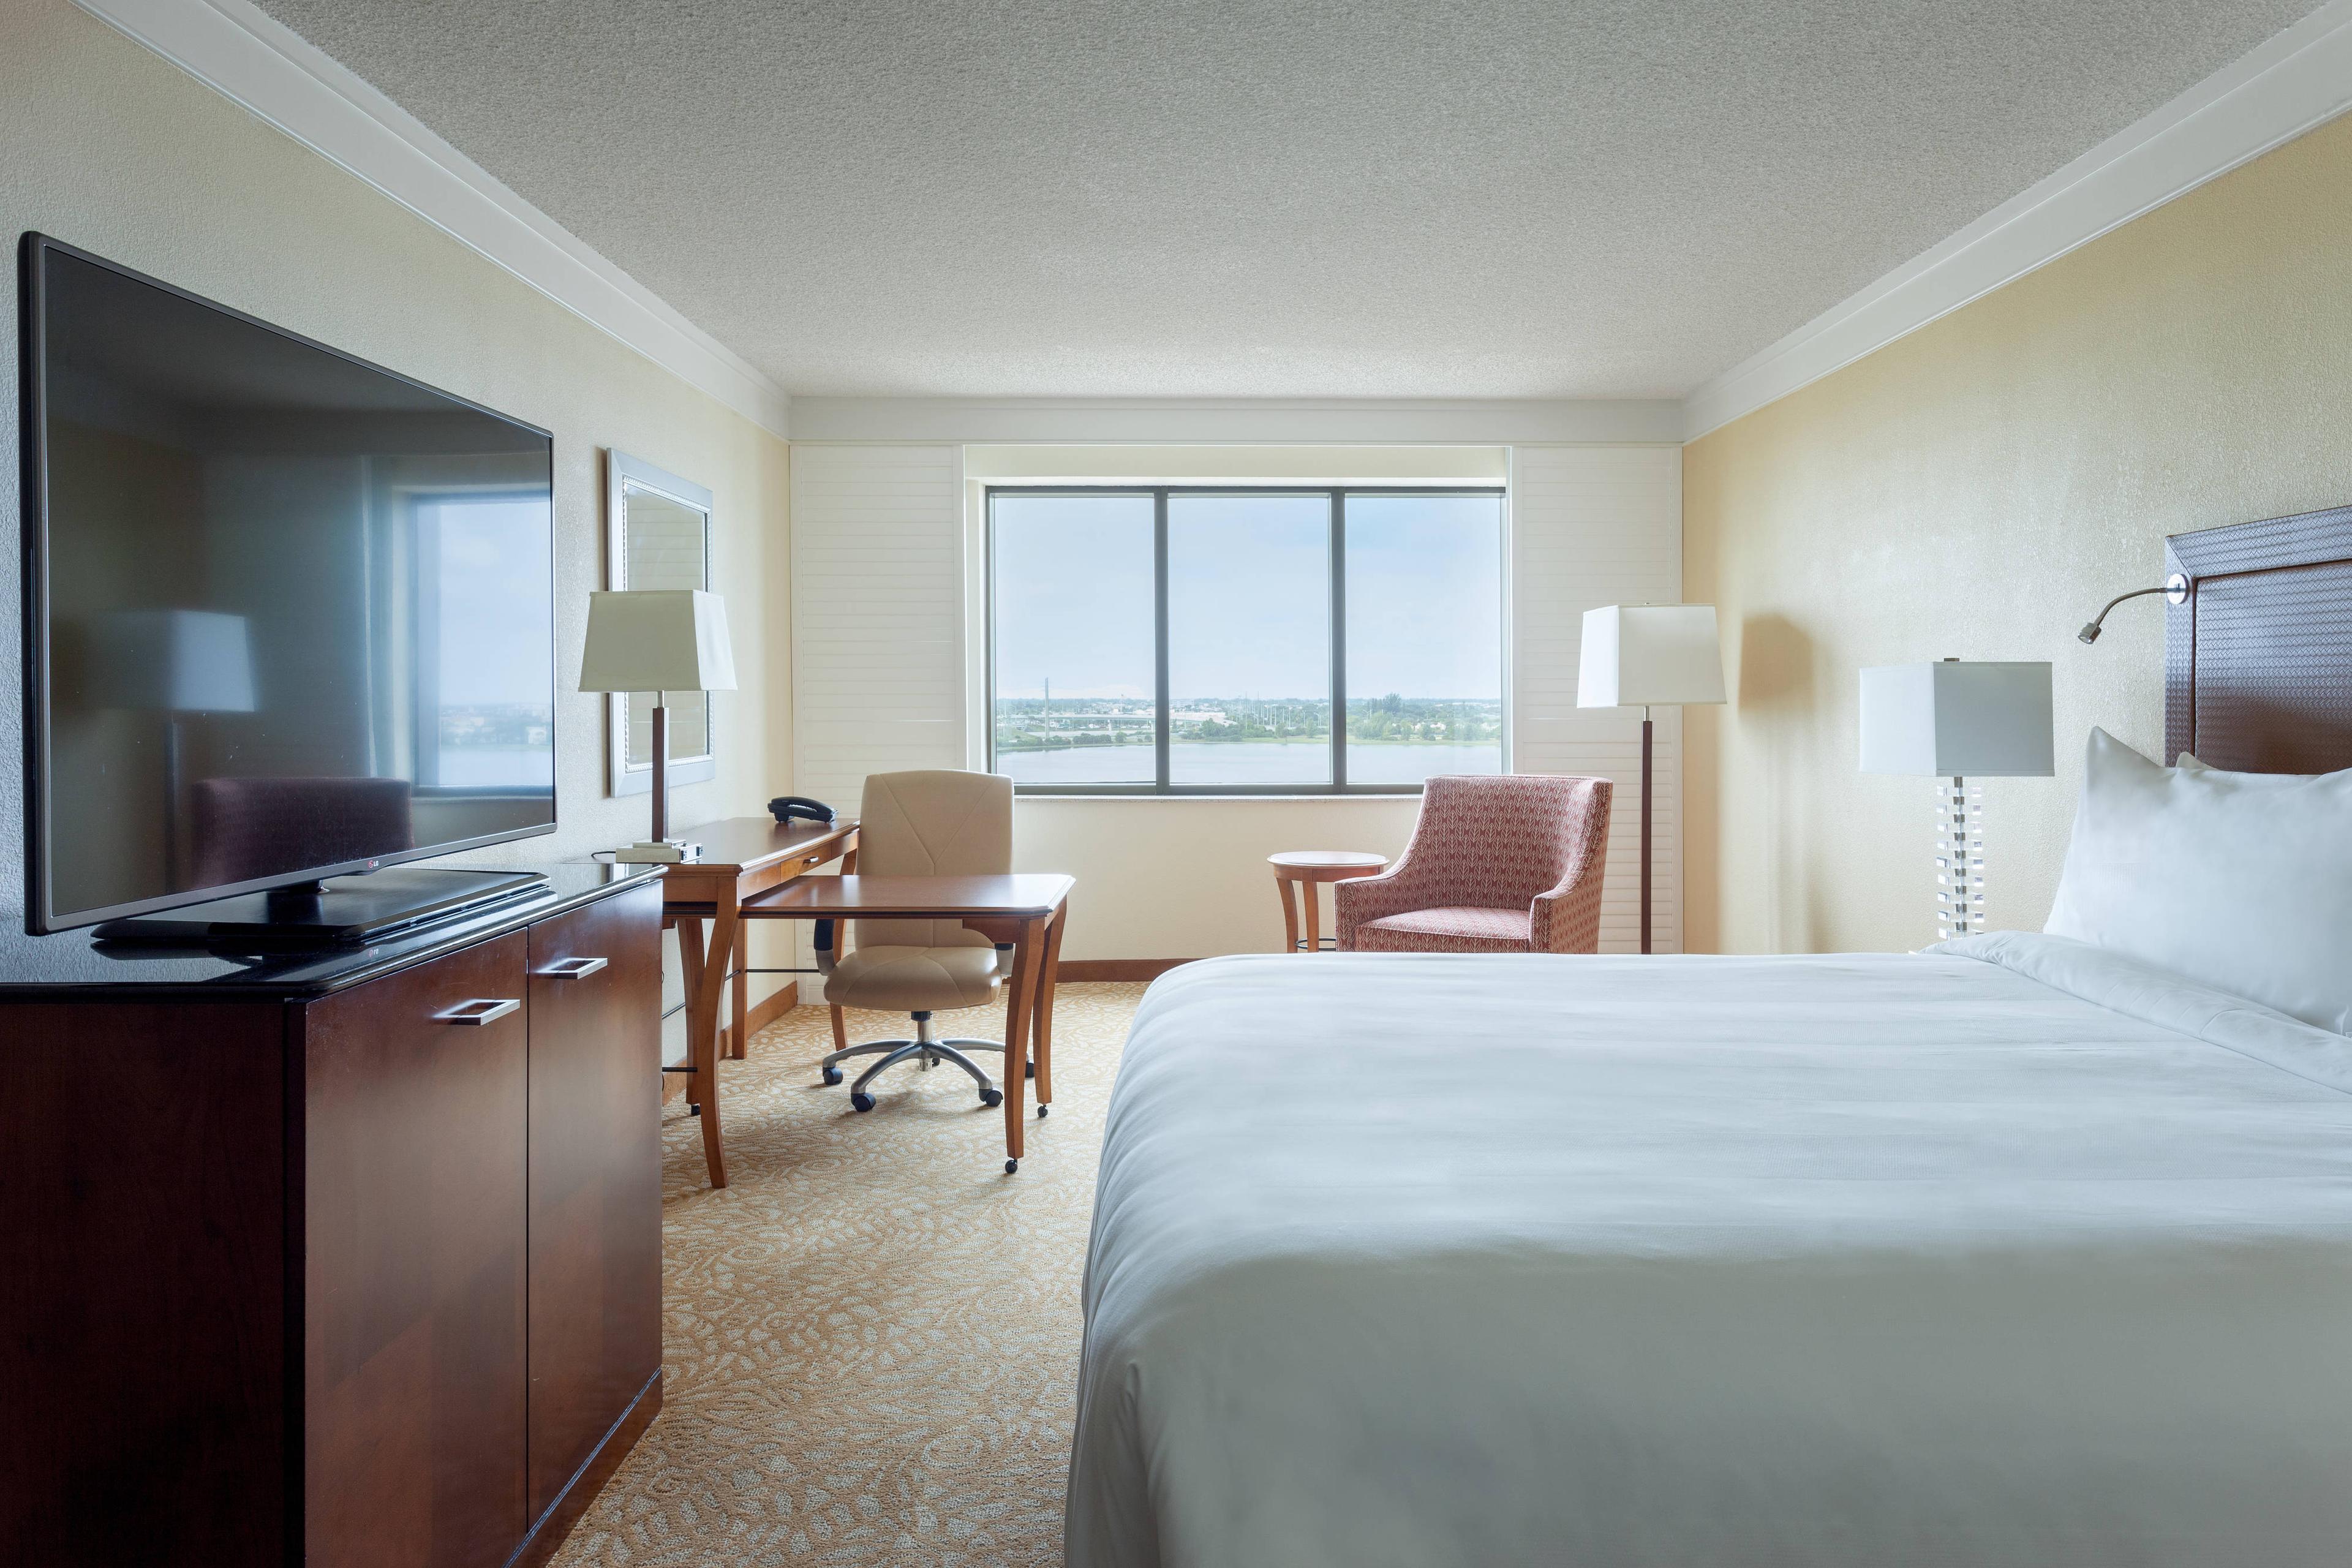 Stretch out and enjoy yourself on our plush king beds. Water View guest rooms add an extra touch of elegance.